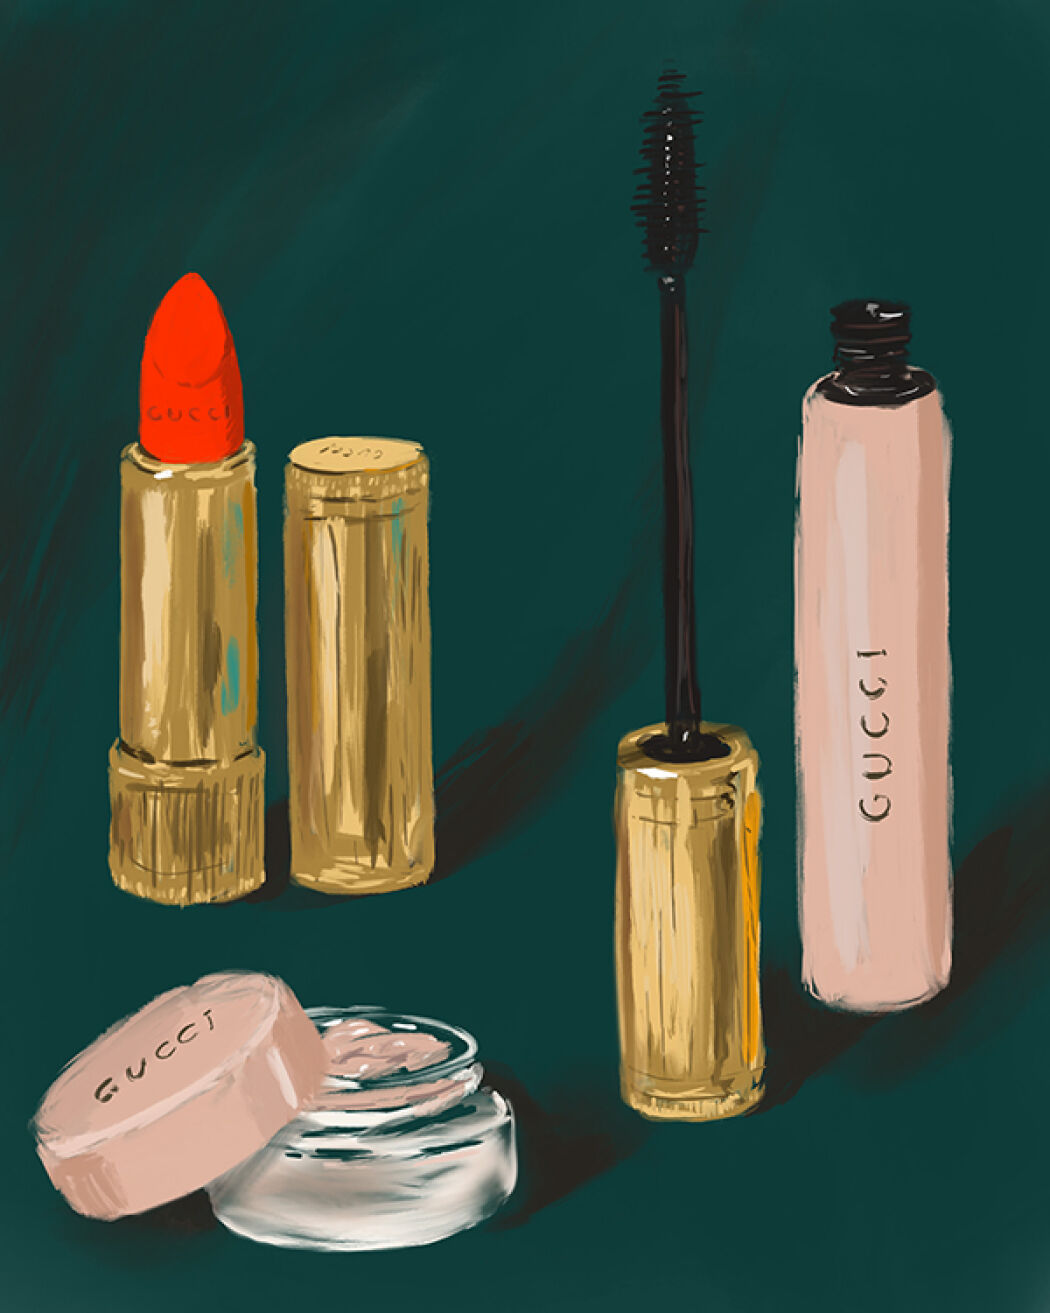 Beauty branding illustration for Gucci by Christina Gliha 